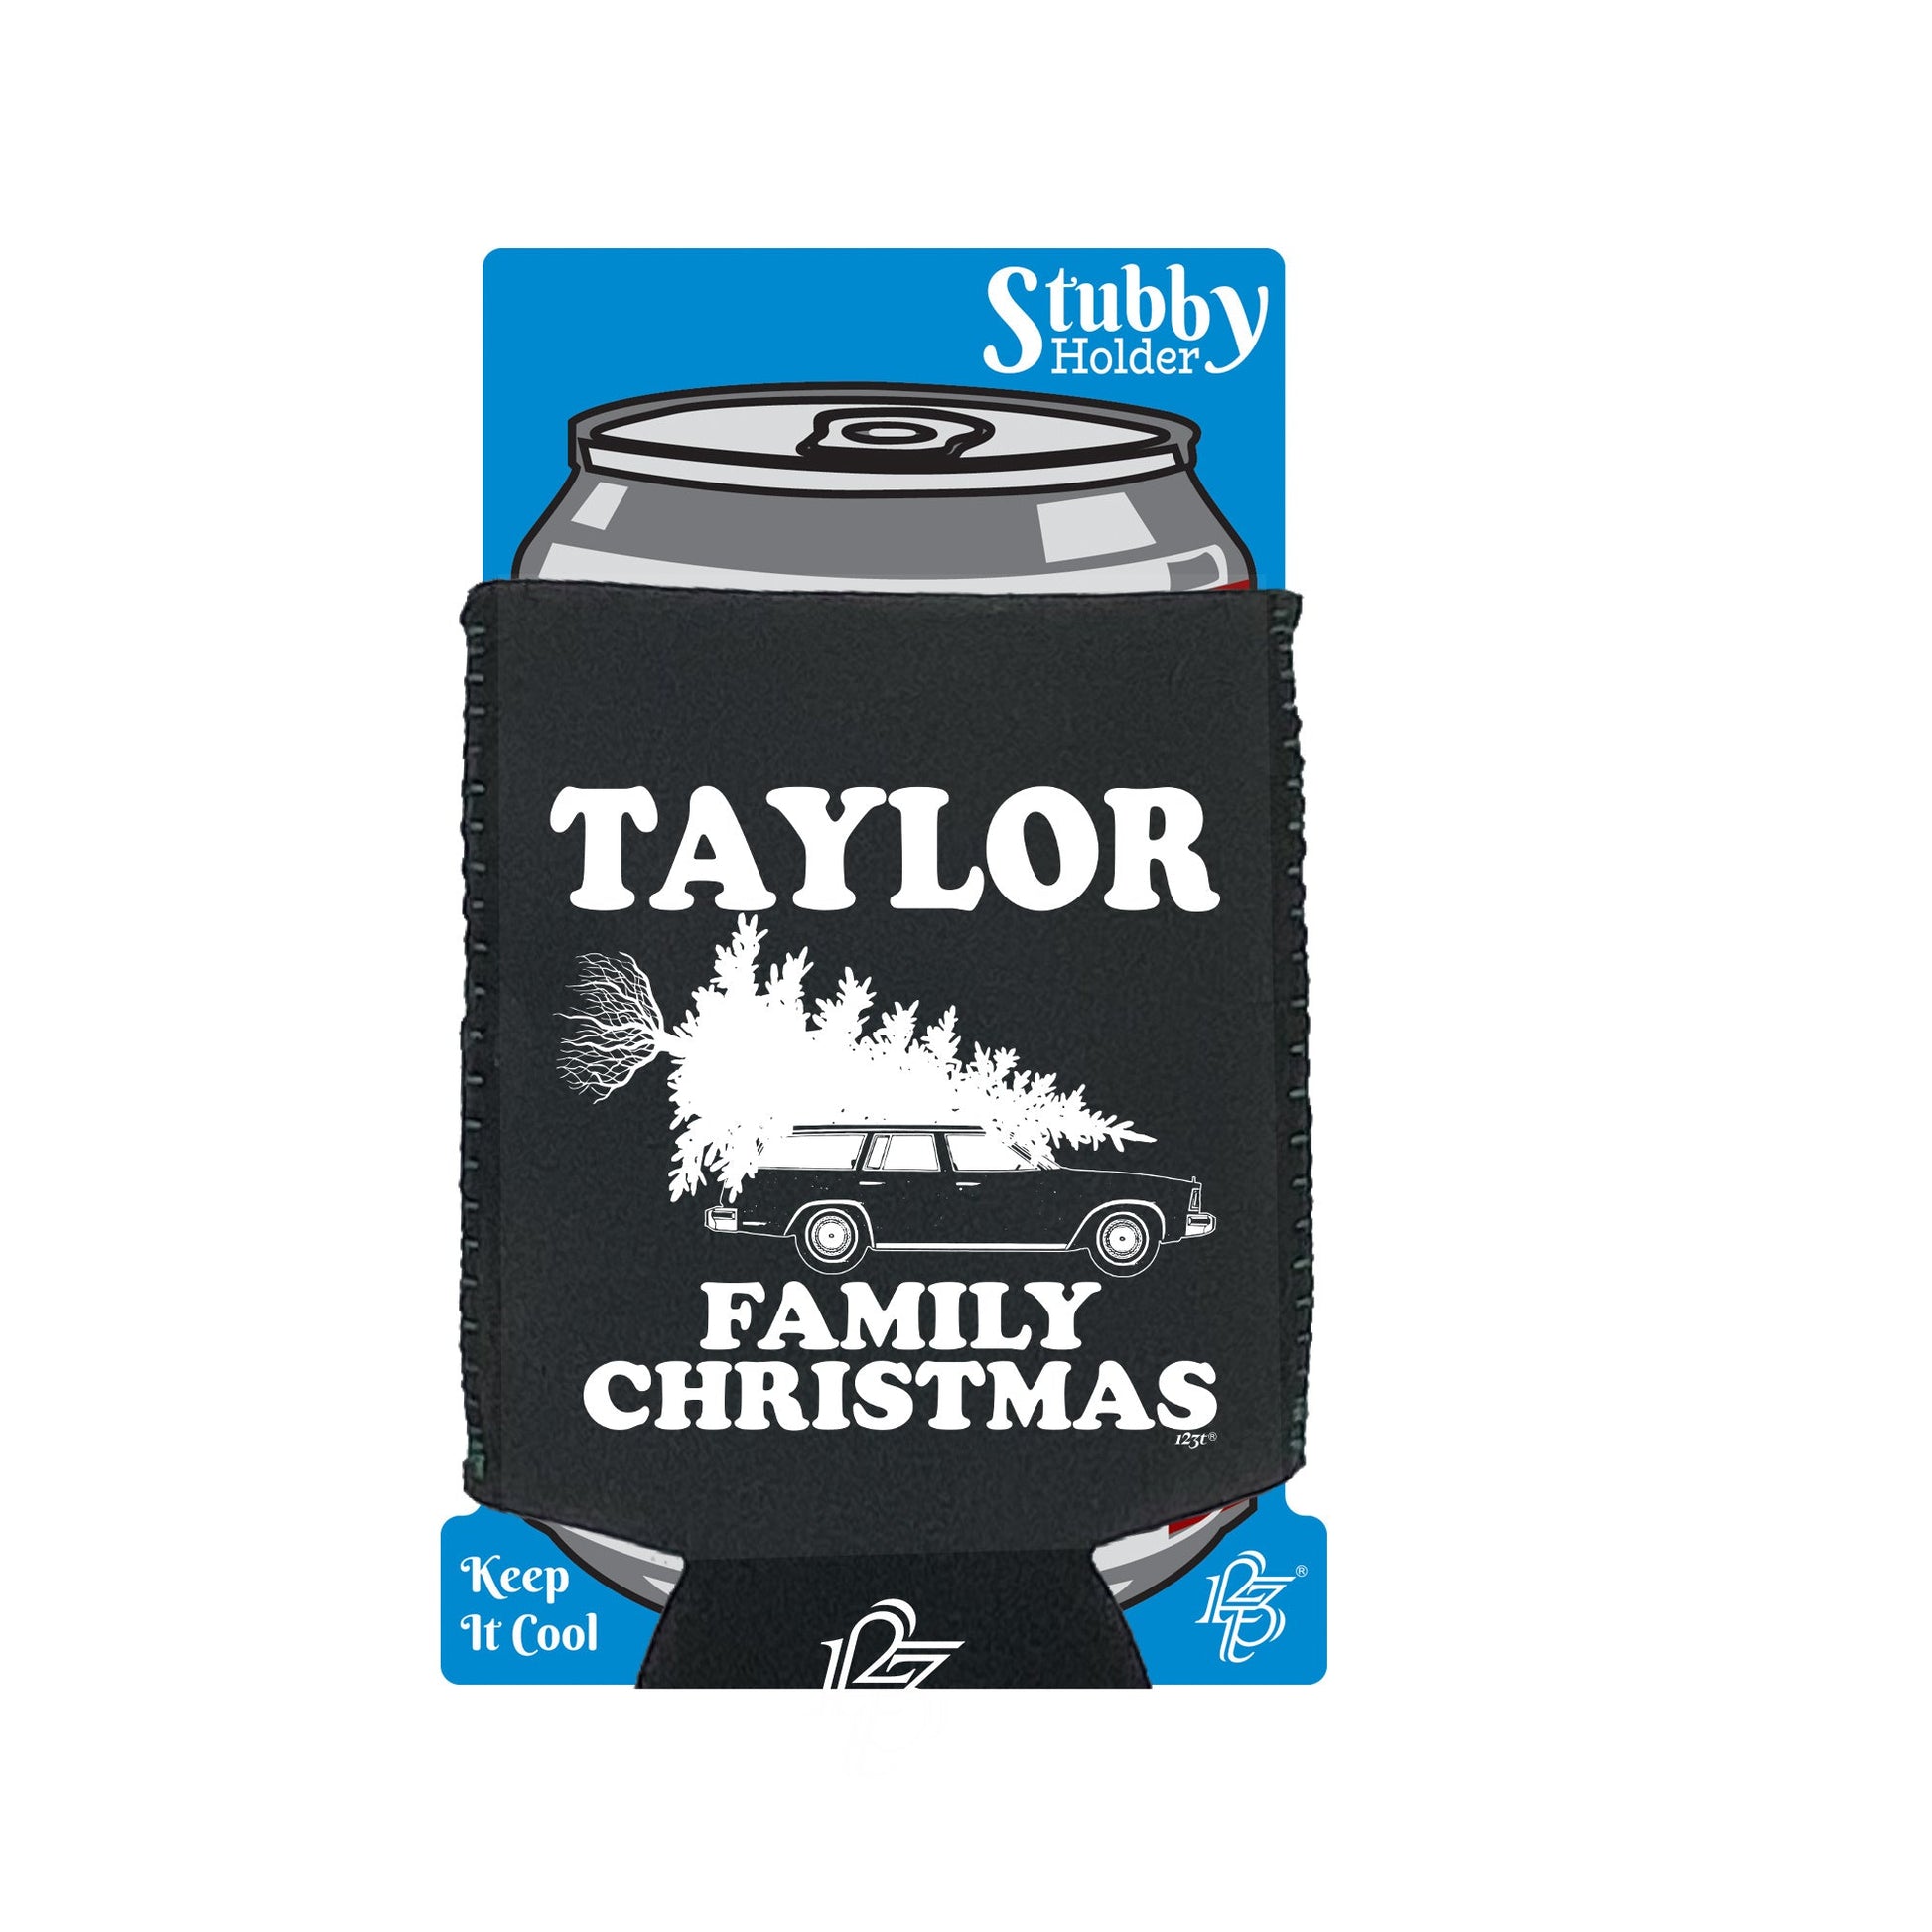 Family Christmas Taylor - Funny Stubby Holder With Base